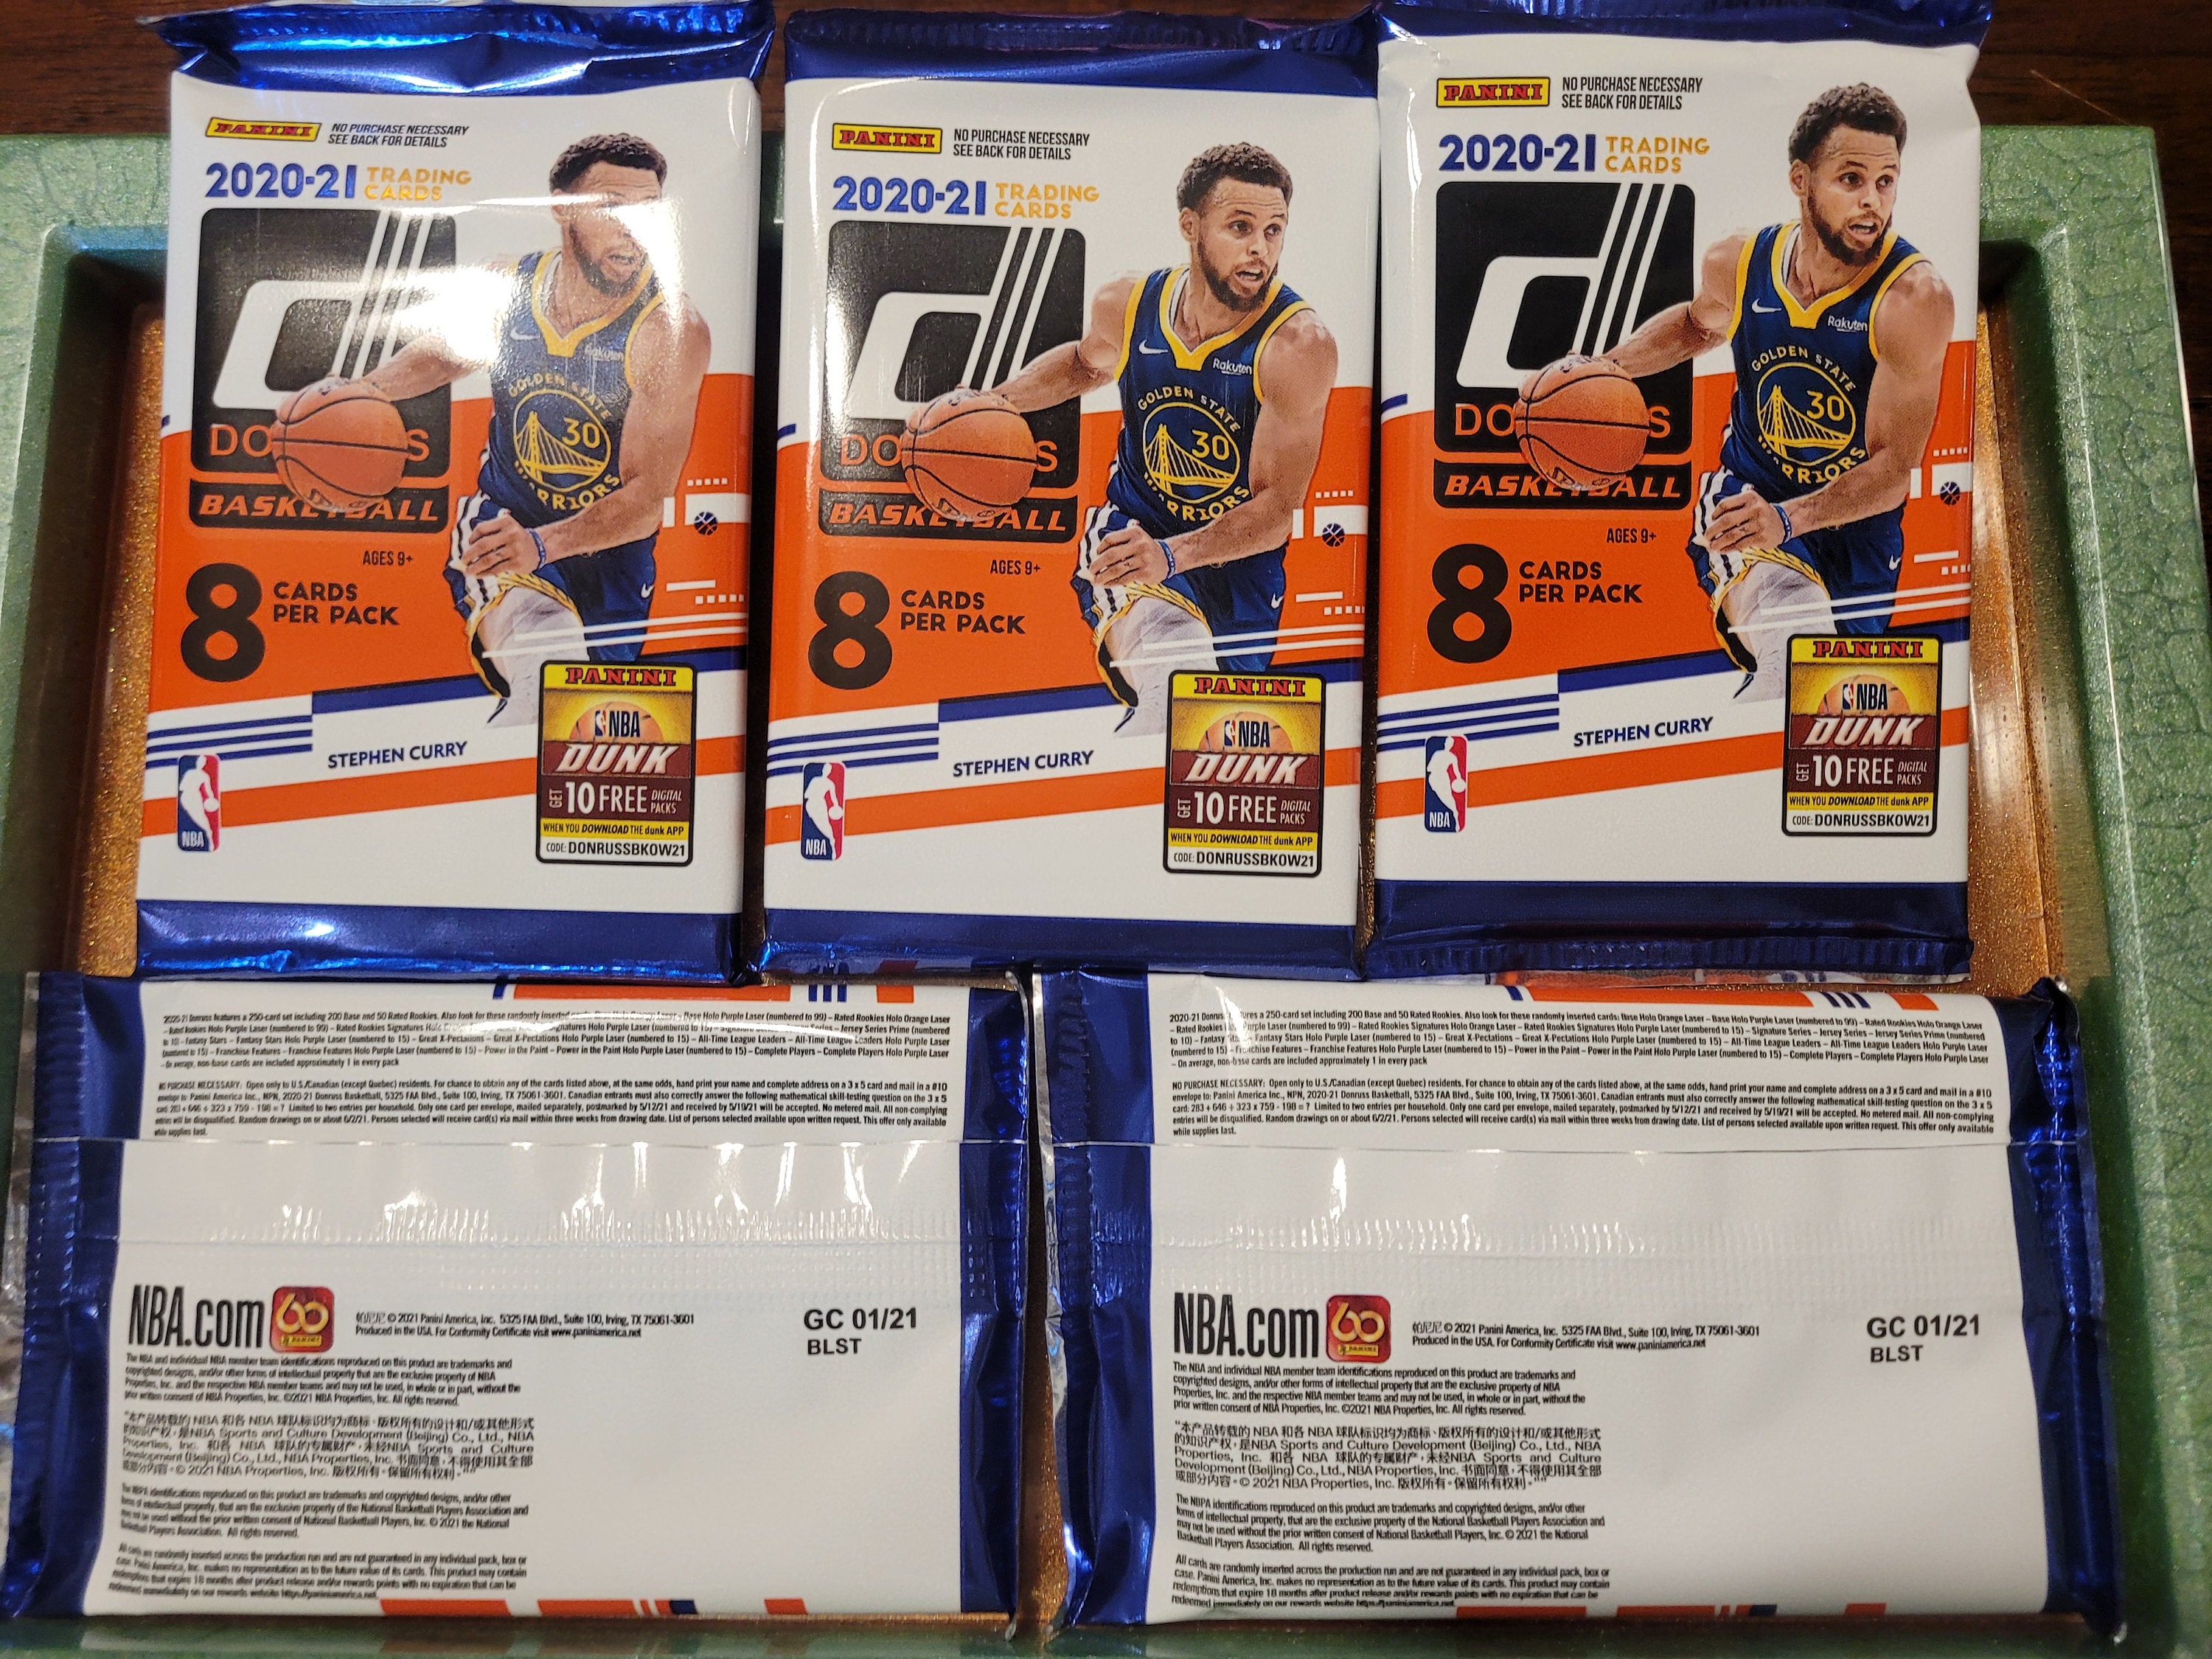 2020-21 Panini NBA Donruss Basketball Cello Pack - 1 Pack of 30 Cards